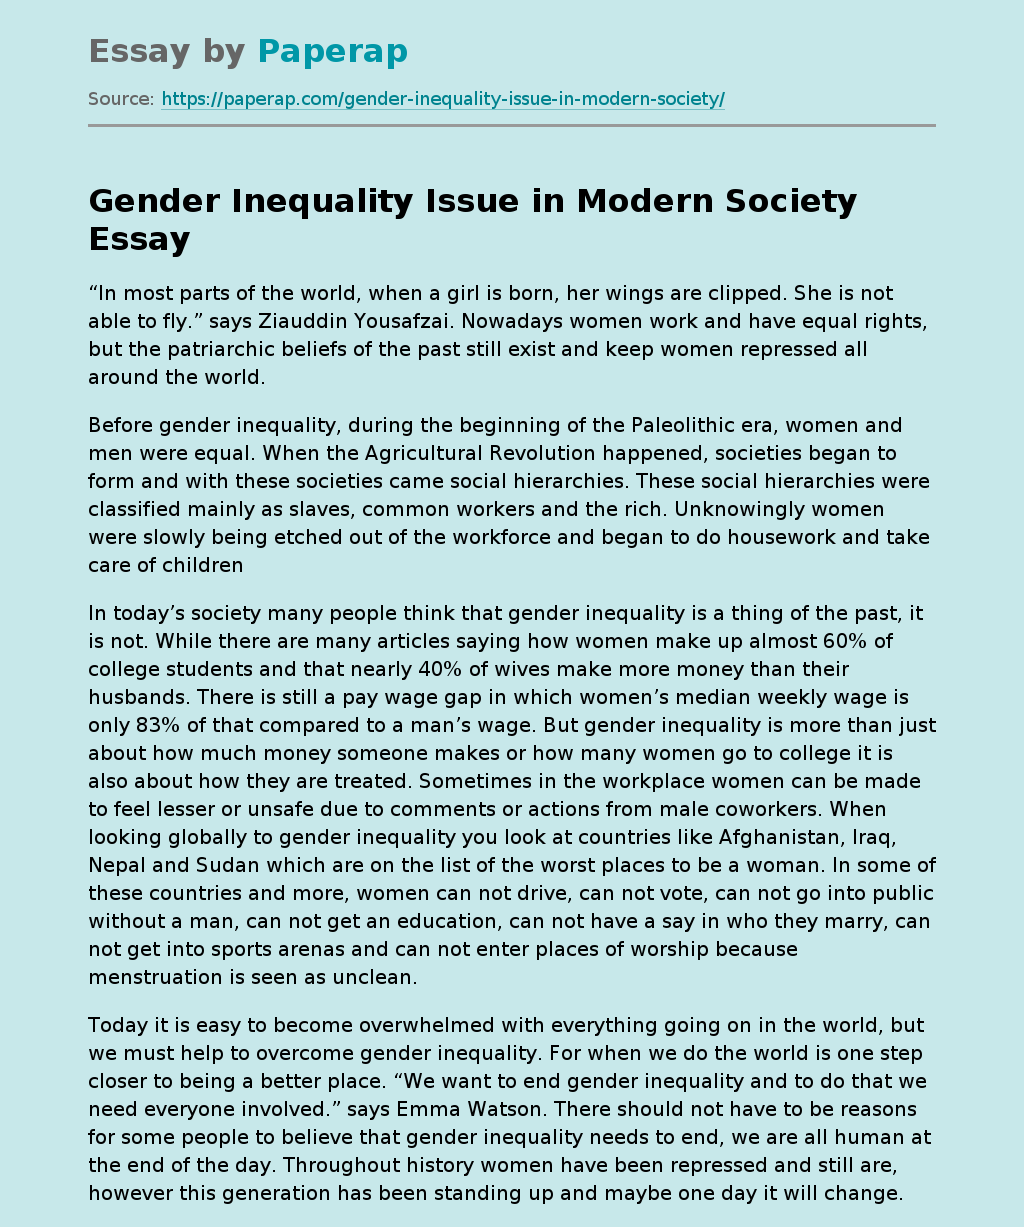 Gender Inequality Issue in Modern Society